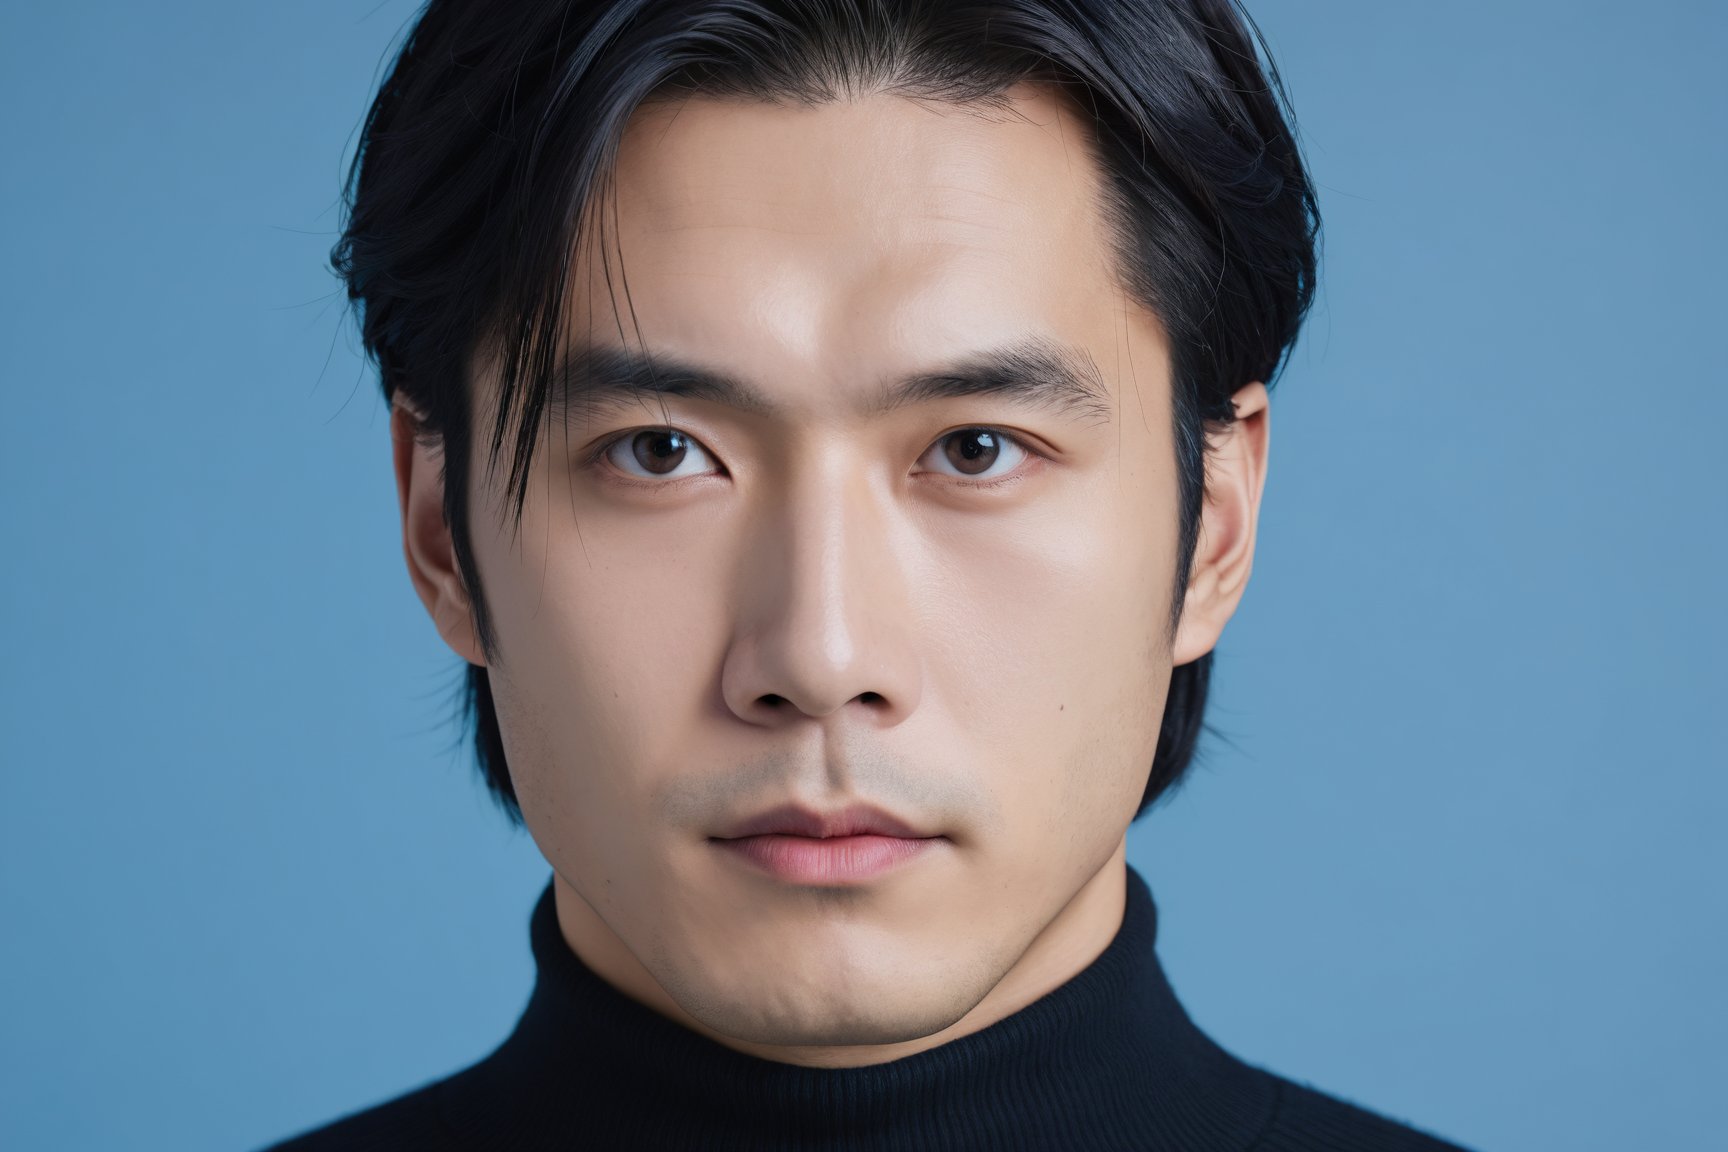 Vietnamese man, close-up portrait, direct gaze, dark hair, black turtleneck, shadow on face, neutral expression, studio lighting, blue background, high-resolution image, minimalistic, young adult, clean-shaven, headshot, symmetrical composition, serious mood, professional photography, dark color palette